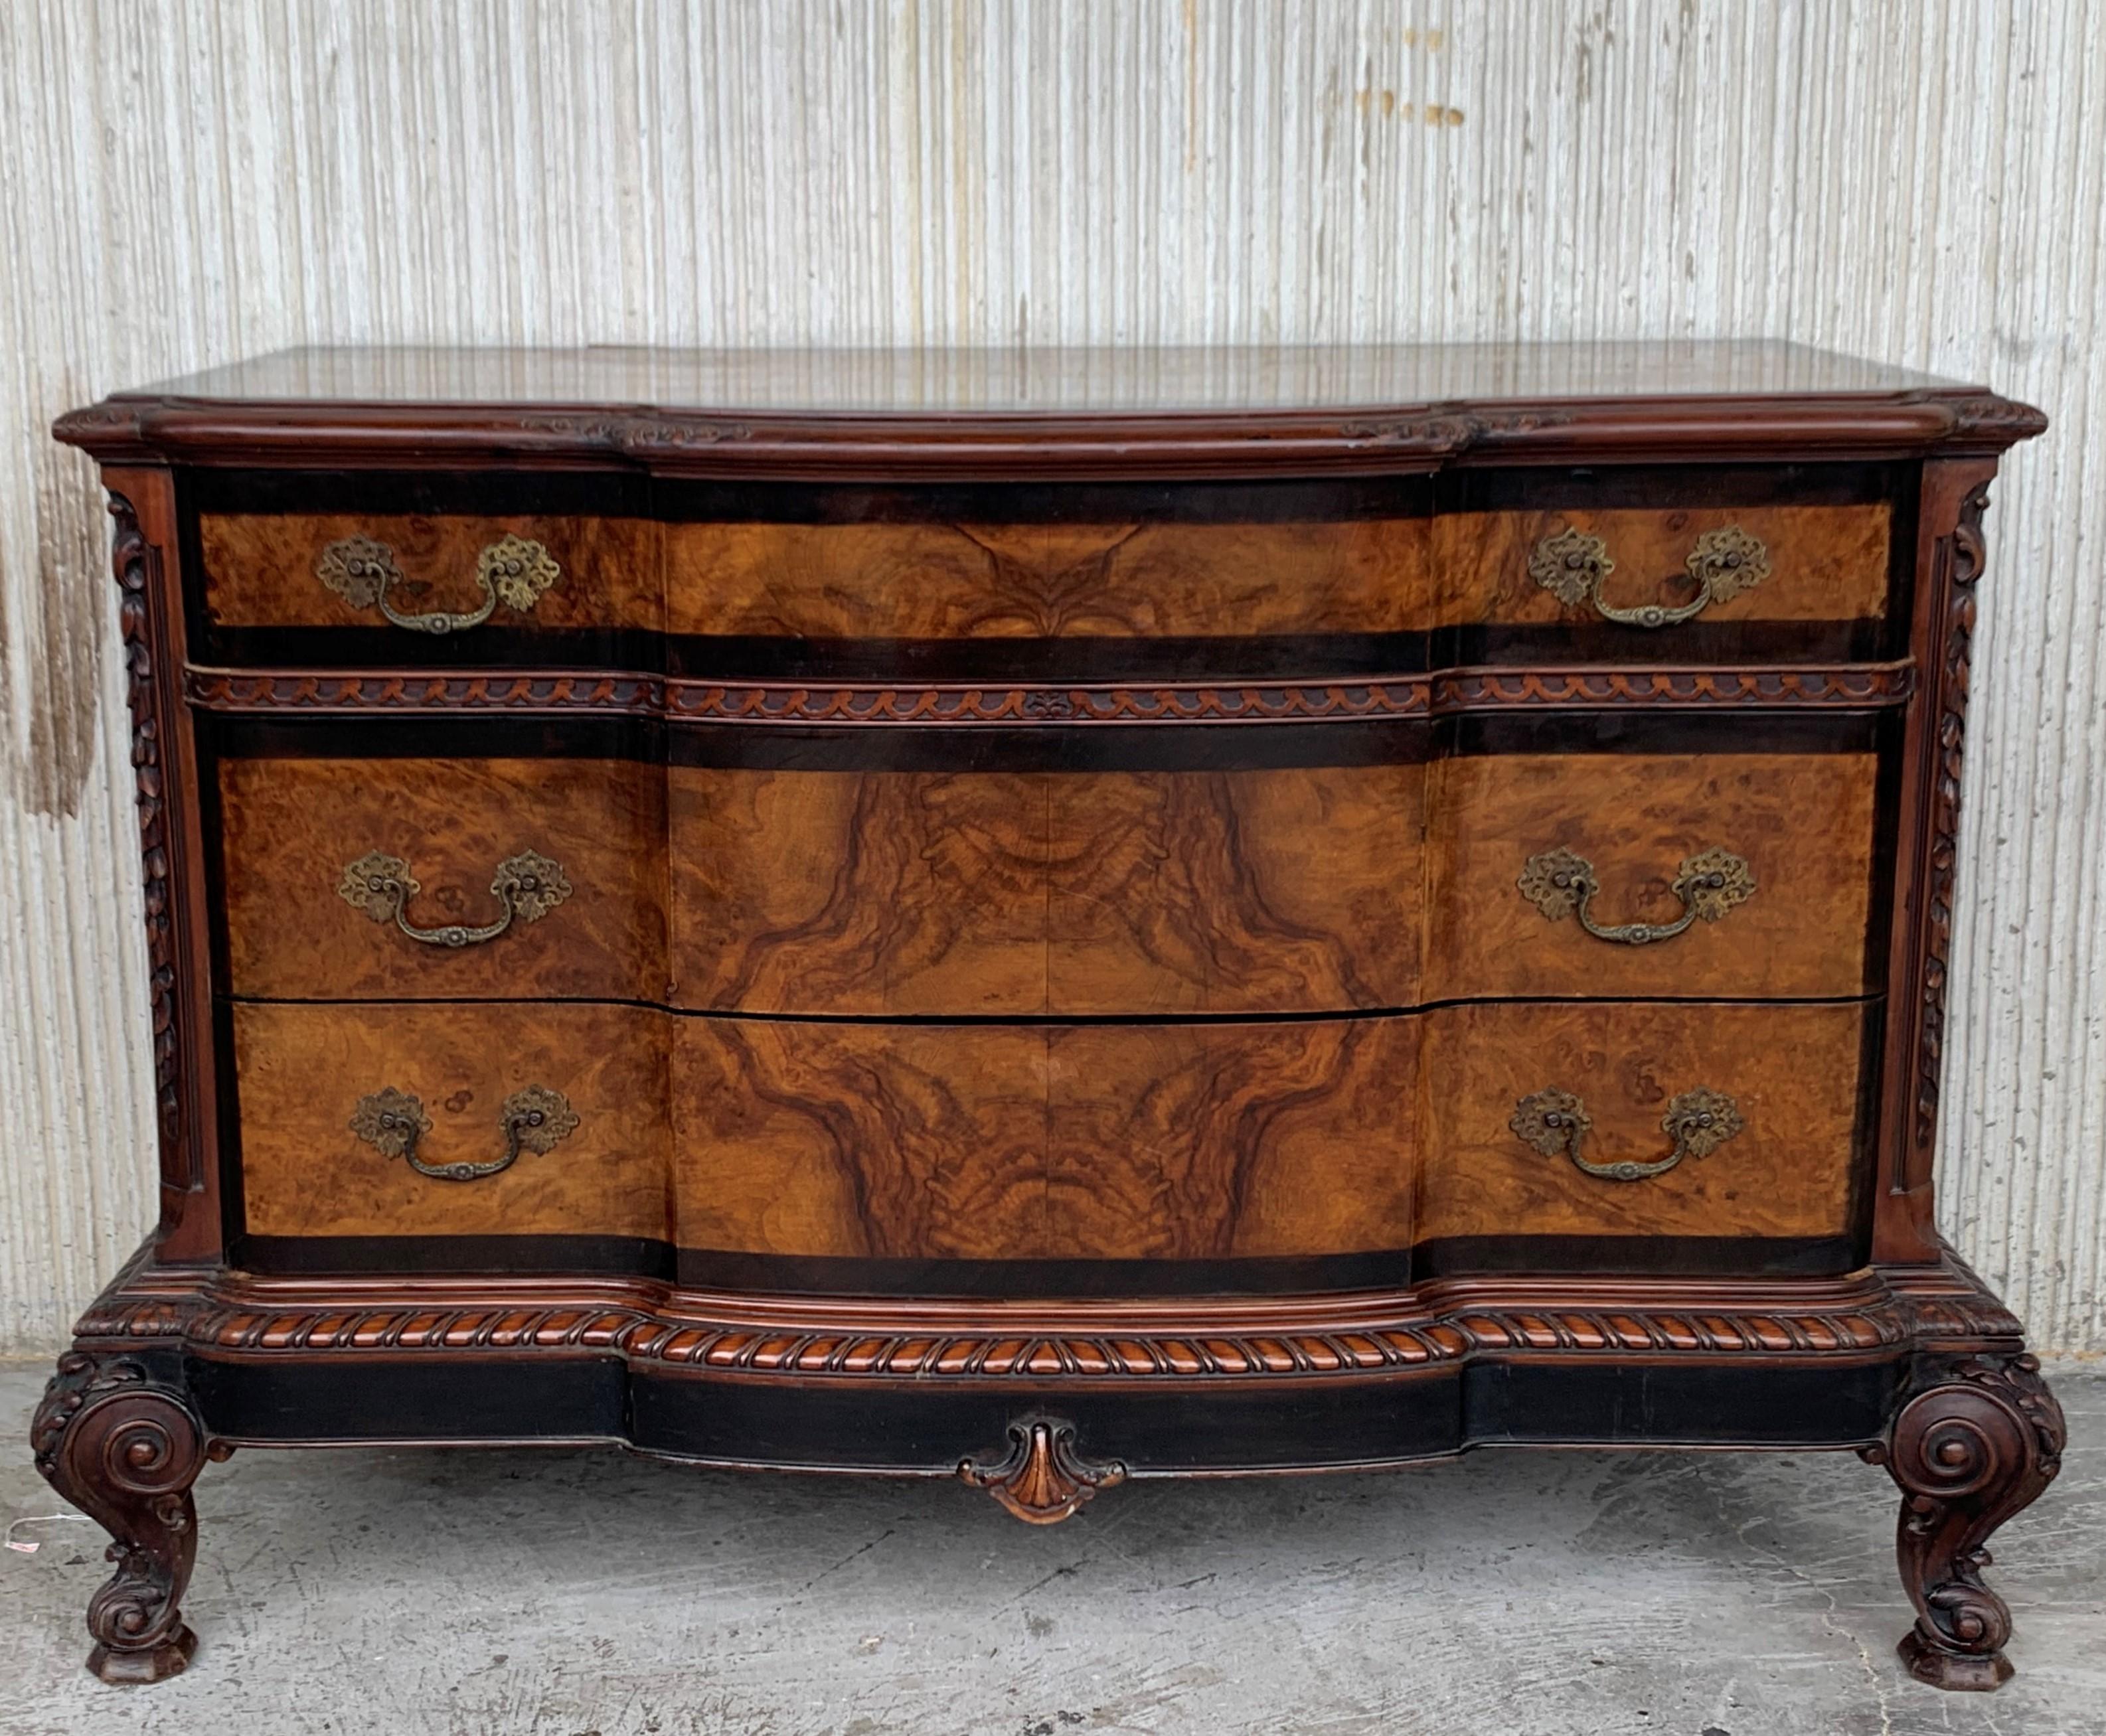 20th Century 1900s Venetian Baroque Dresser with mirror in Burl Walnut with Ebonized Details For Sale